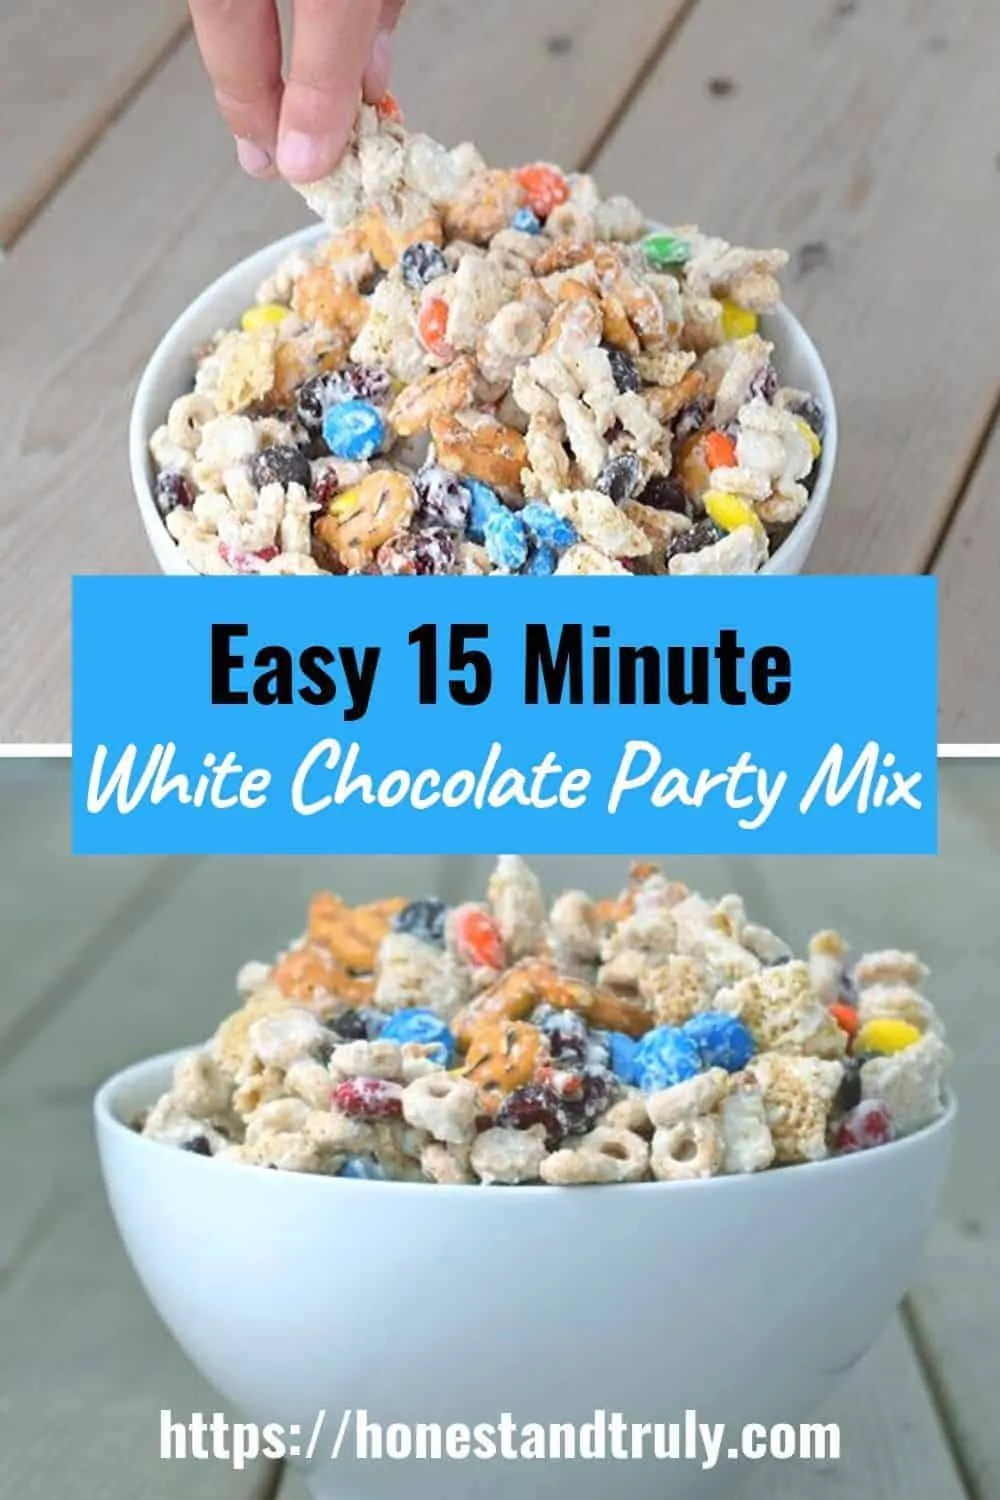 Bowls of white chocolate party mix